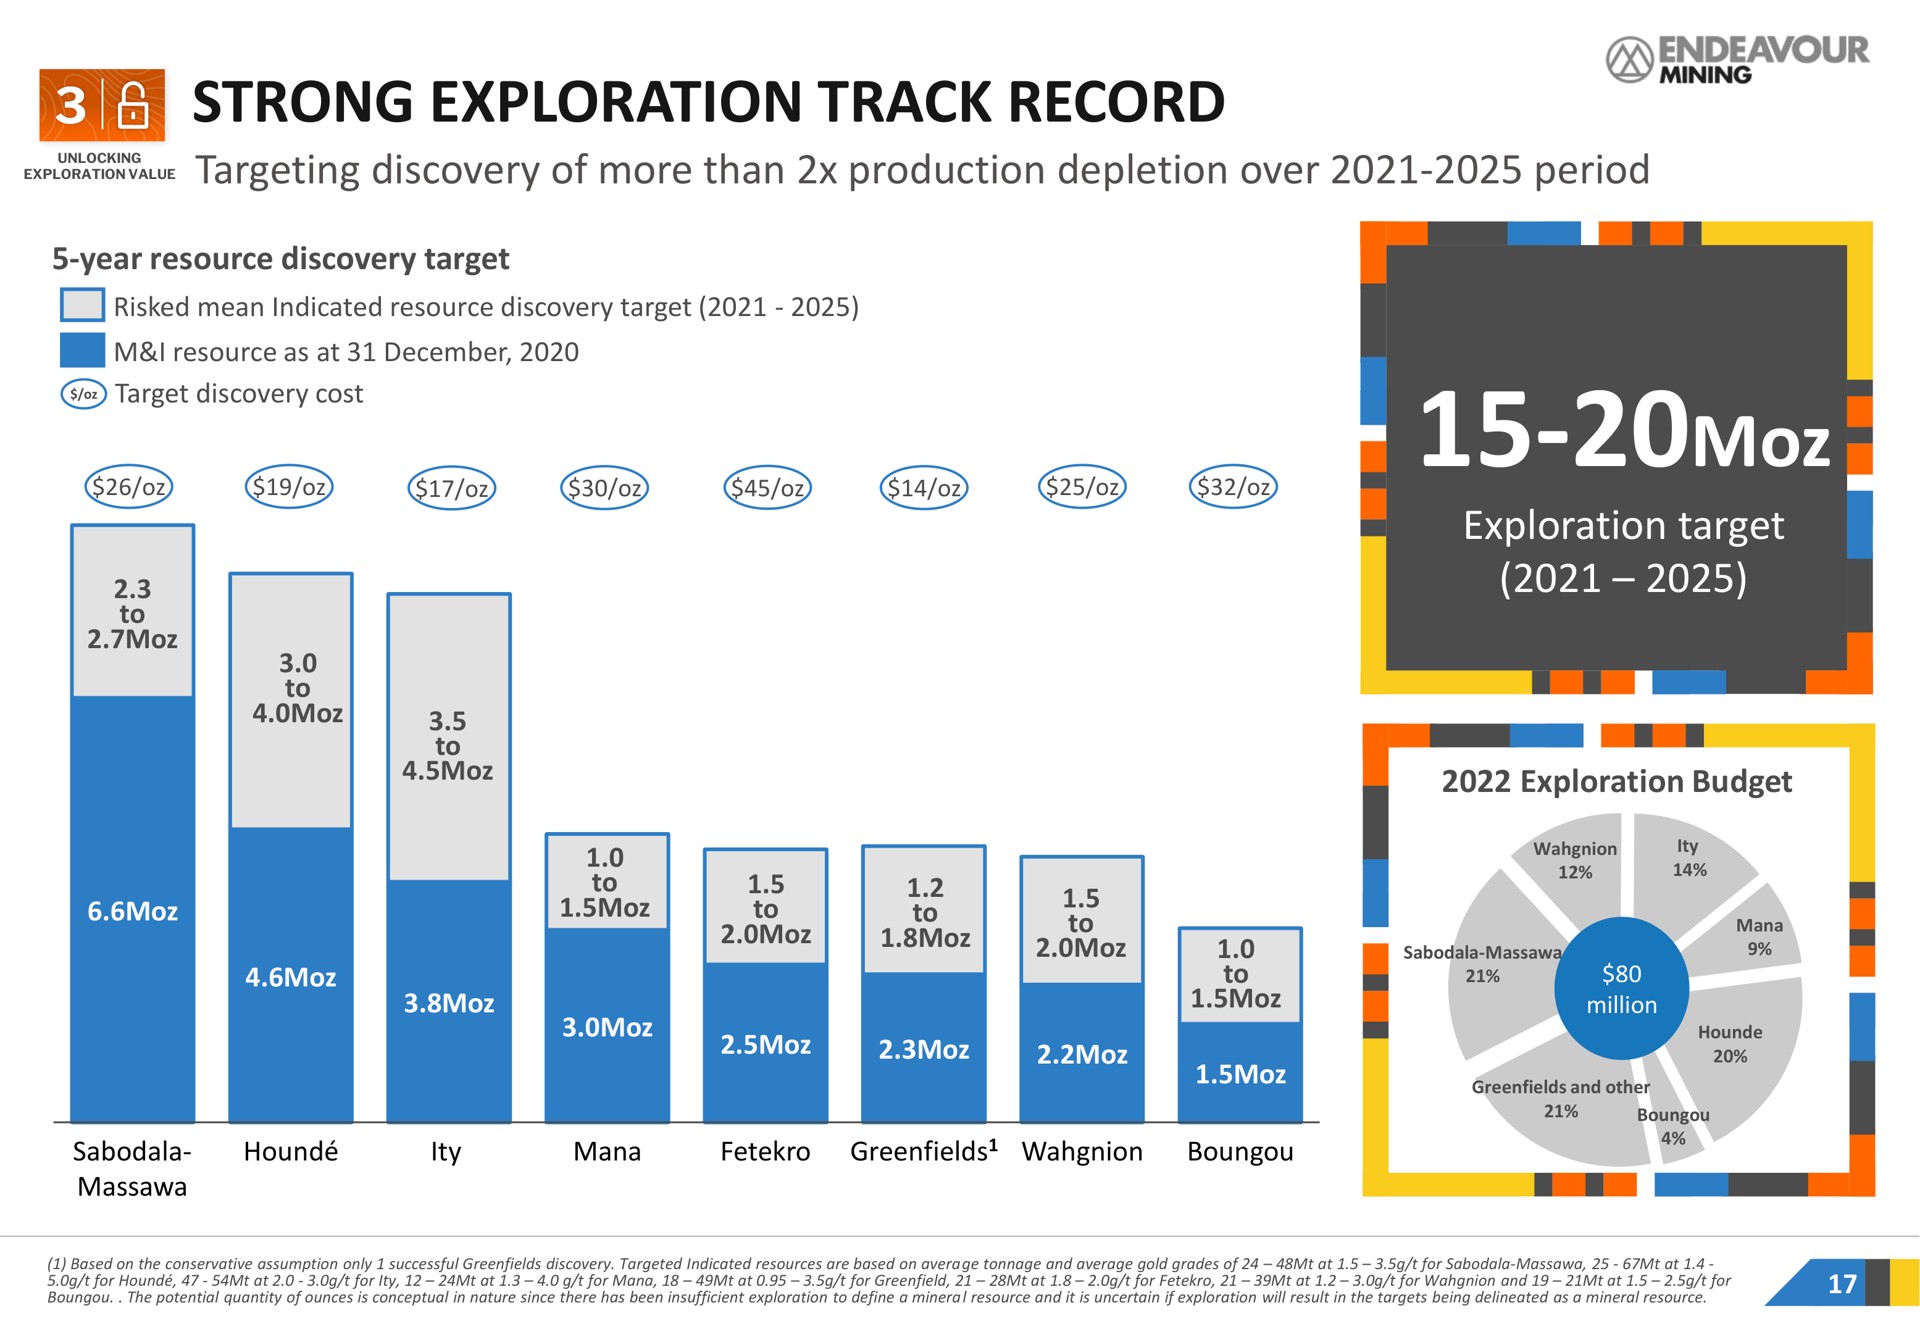 strong exploration track record targeting discovery of more than production depletion over period exploration target | Endeavour Mining